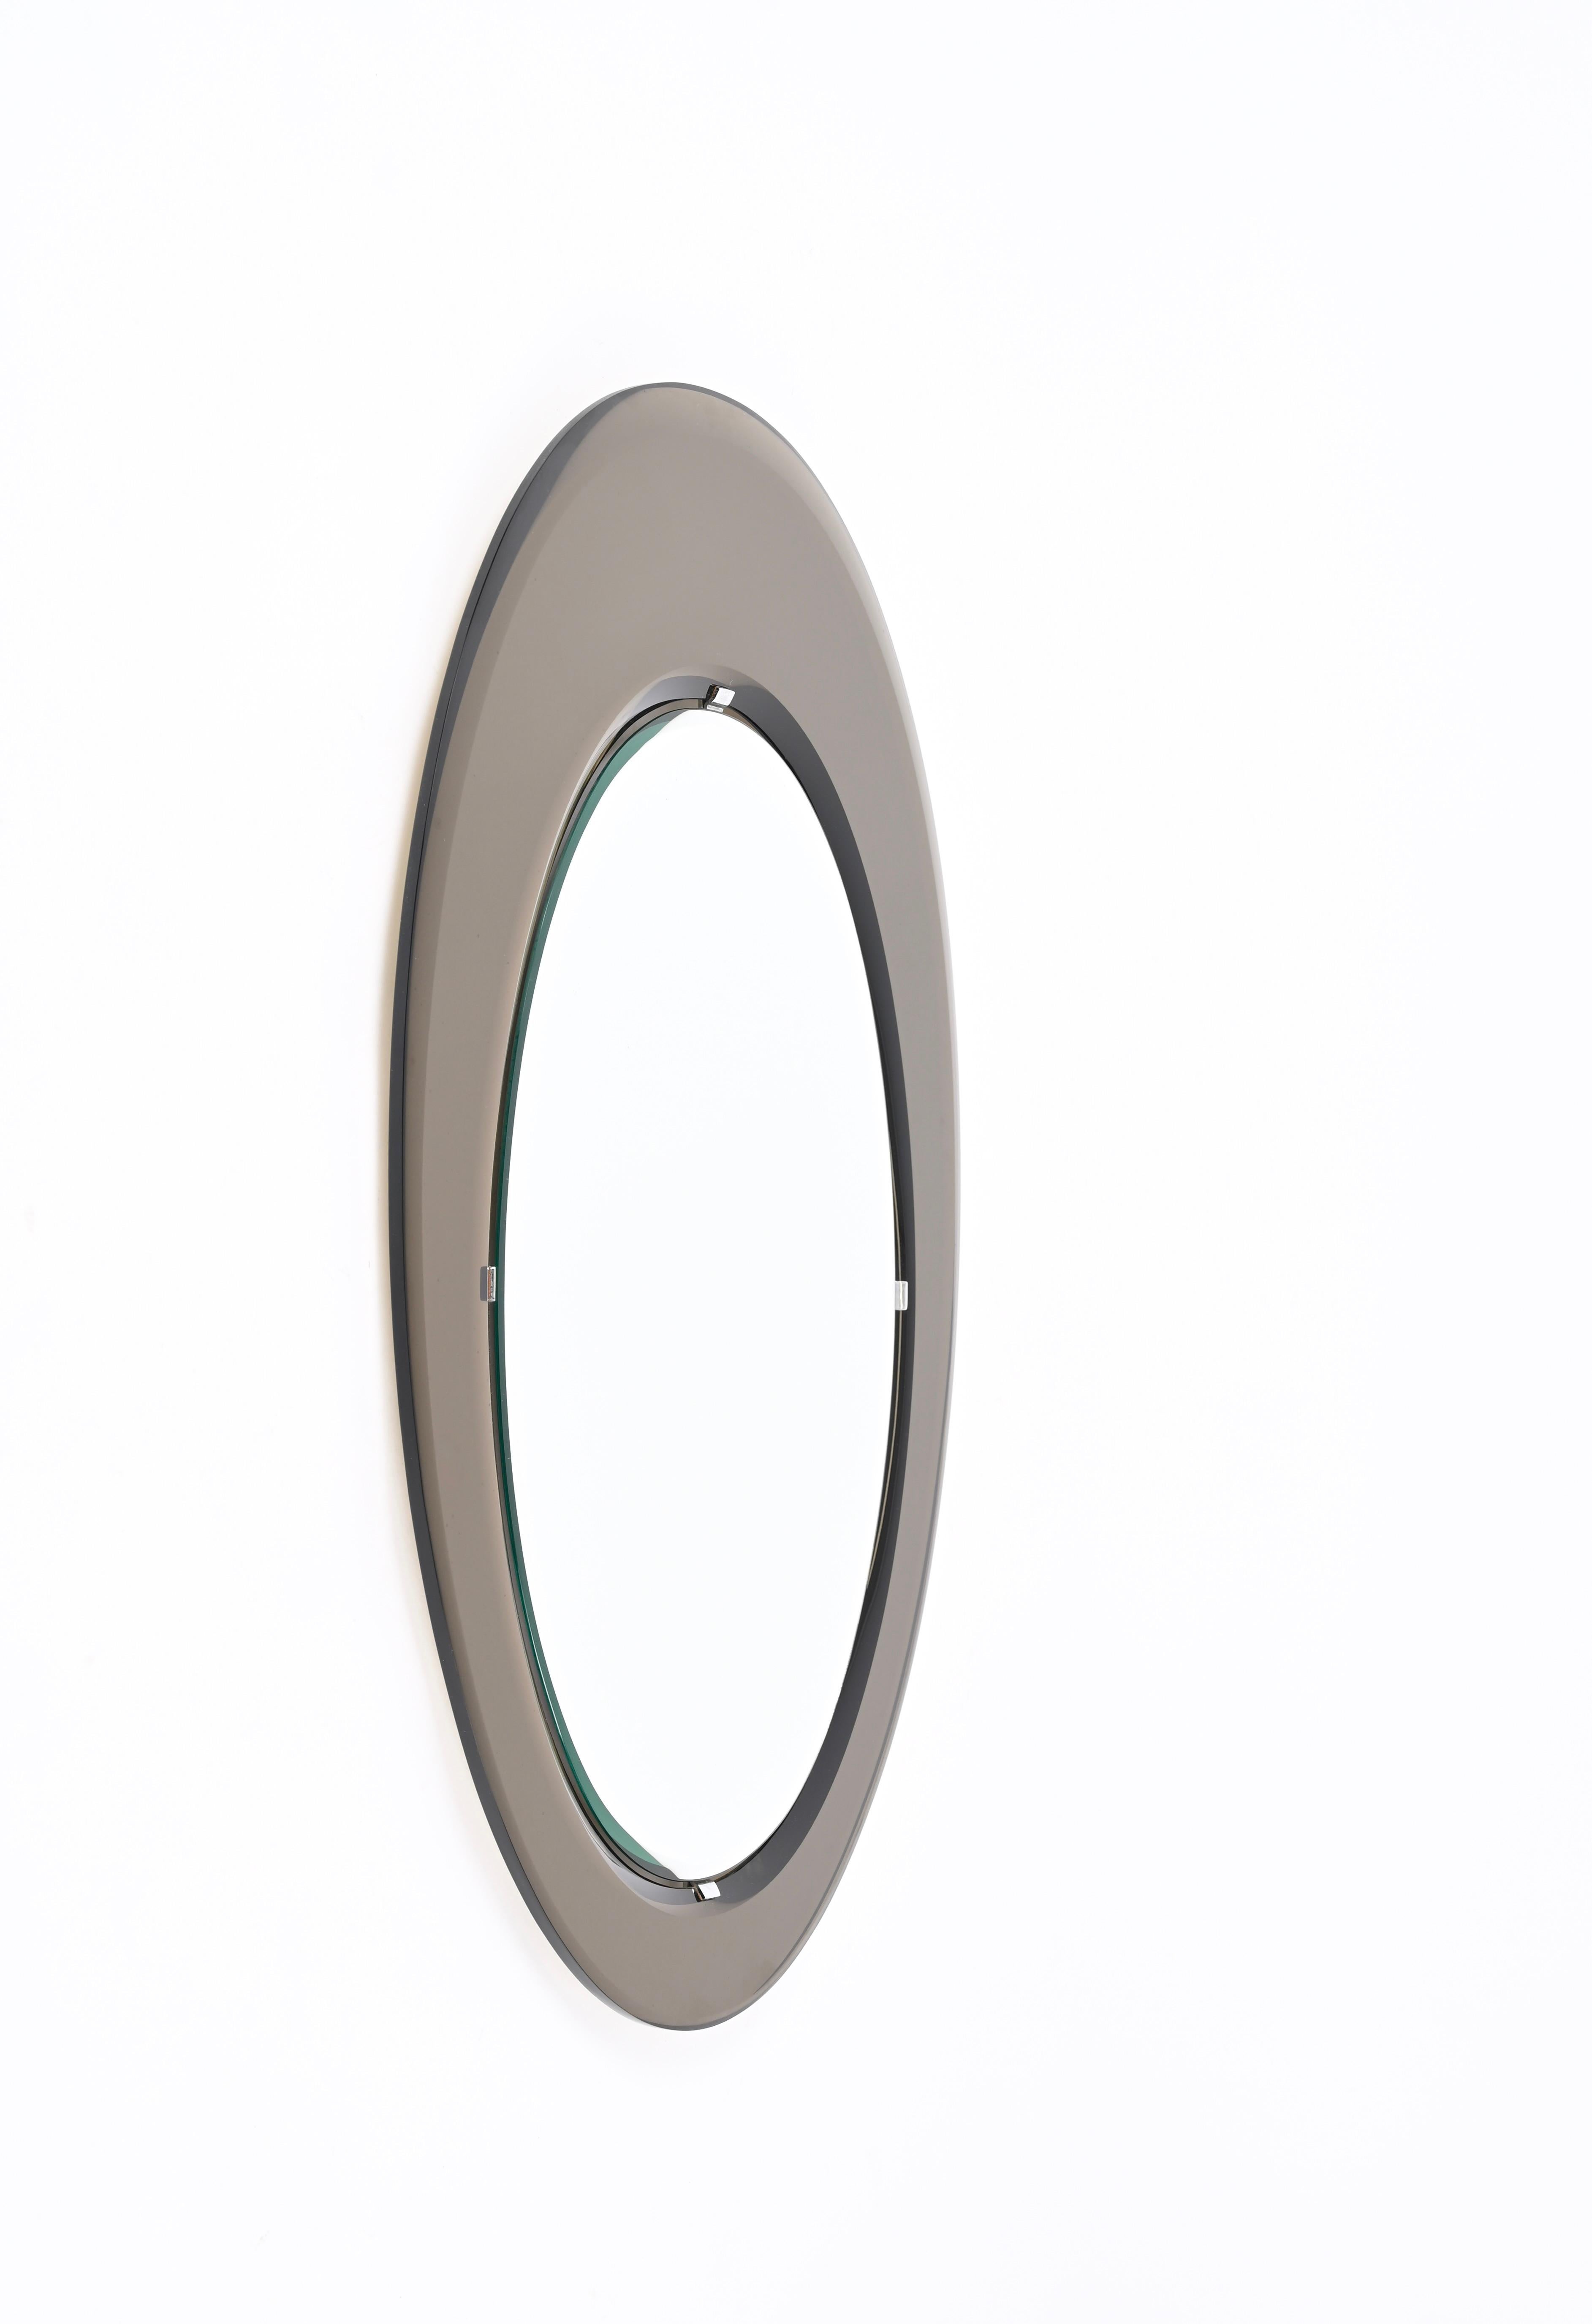 MidCentury Triple Beveled Oval Bronze Colored Mirror by Cristal Art, Italy 1960s For Sale 2